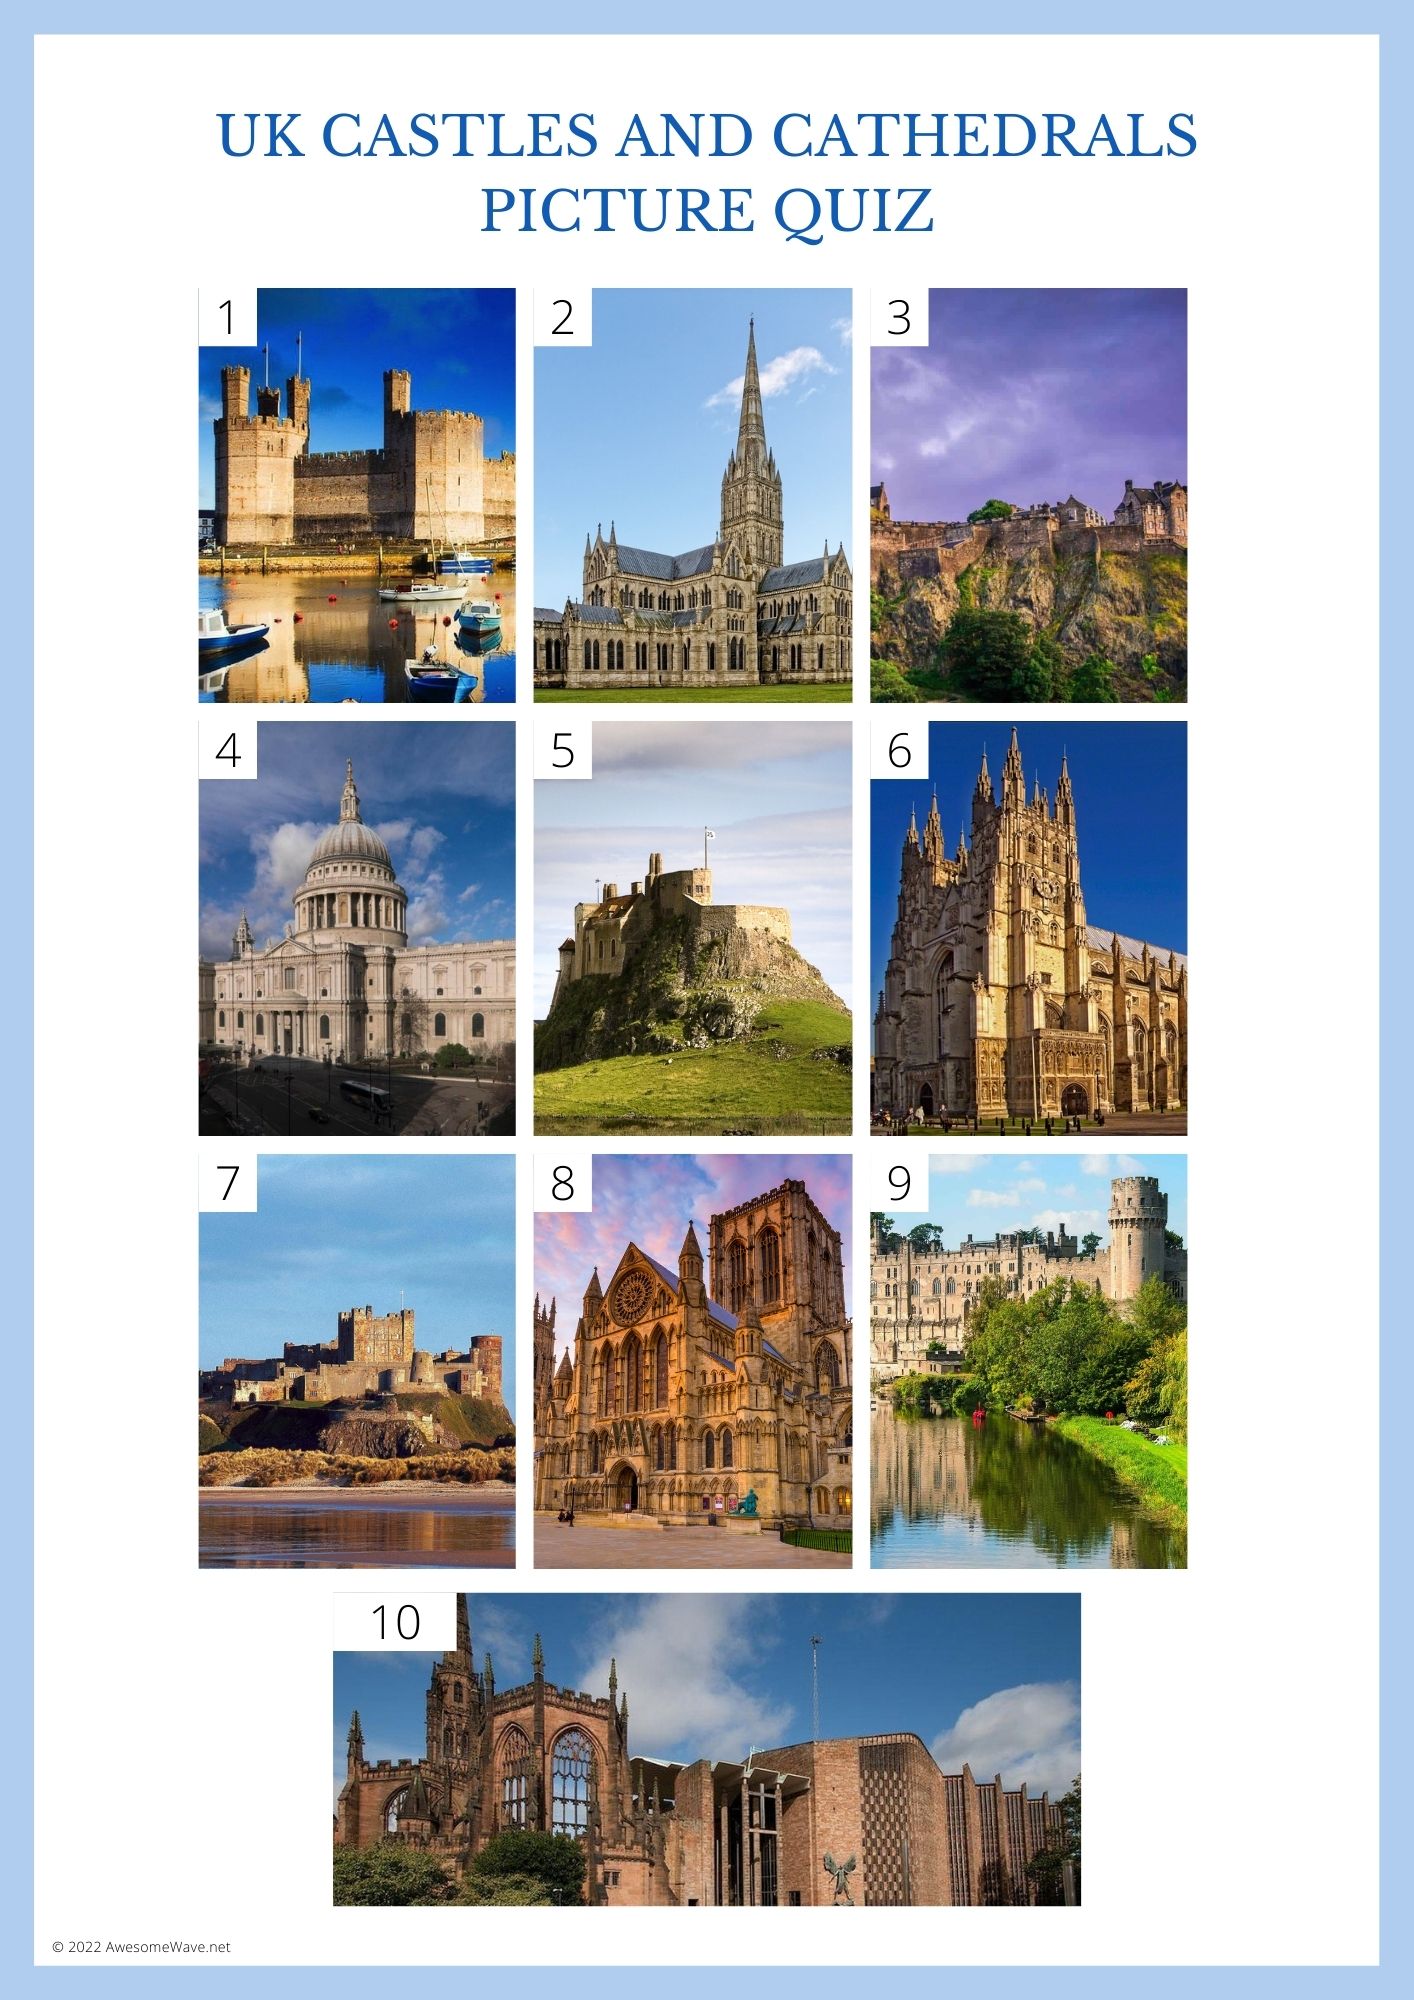 10 photos of castles and cathedrals located in the UK as part of the UK geography picture quiz.